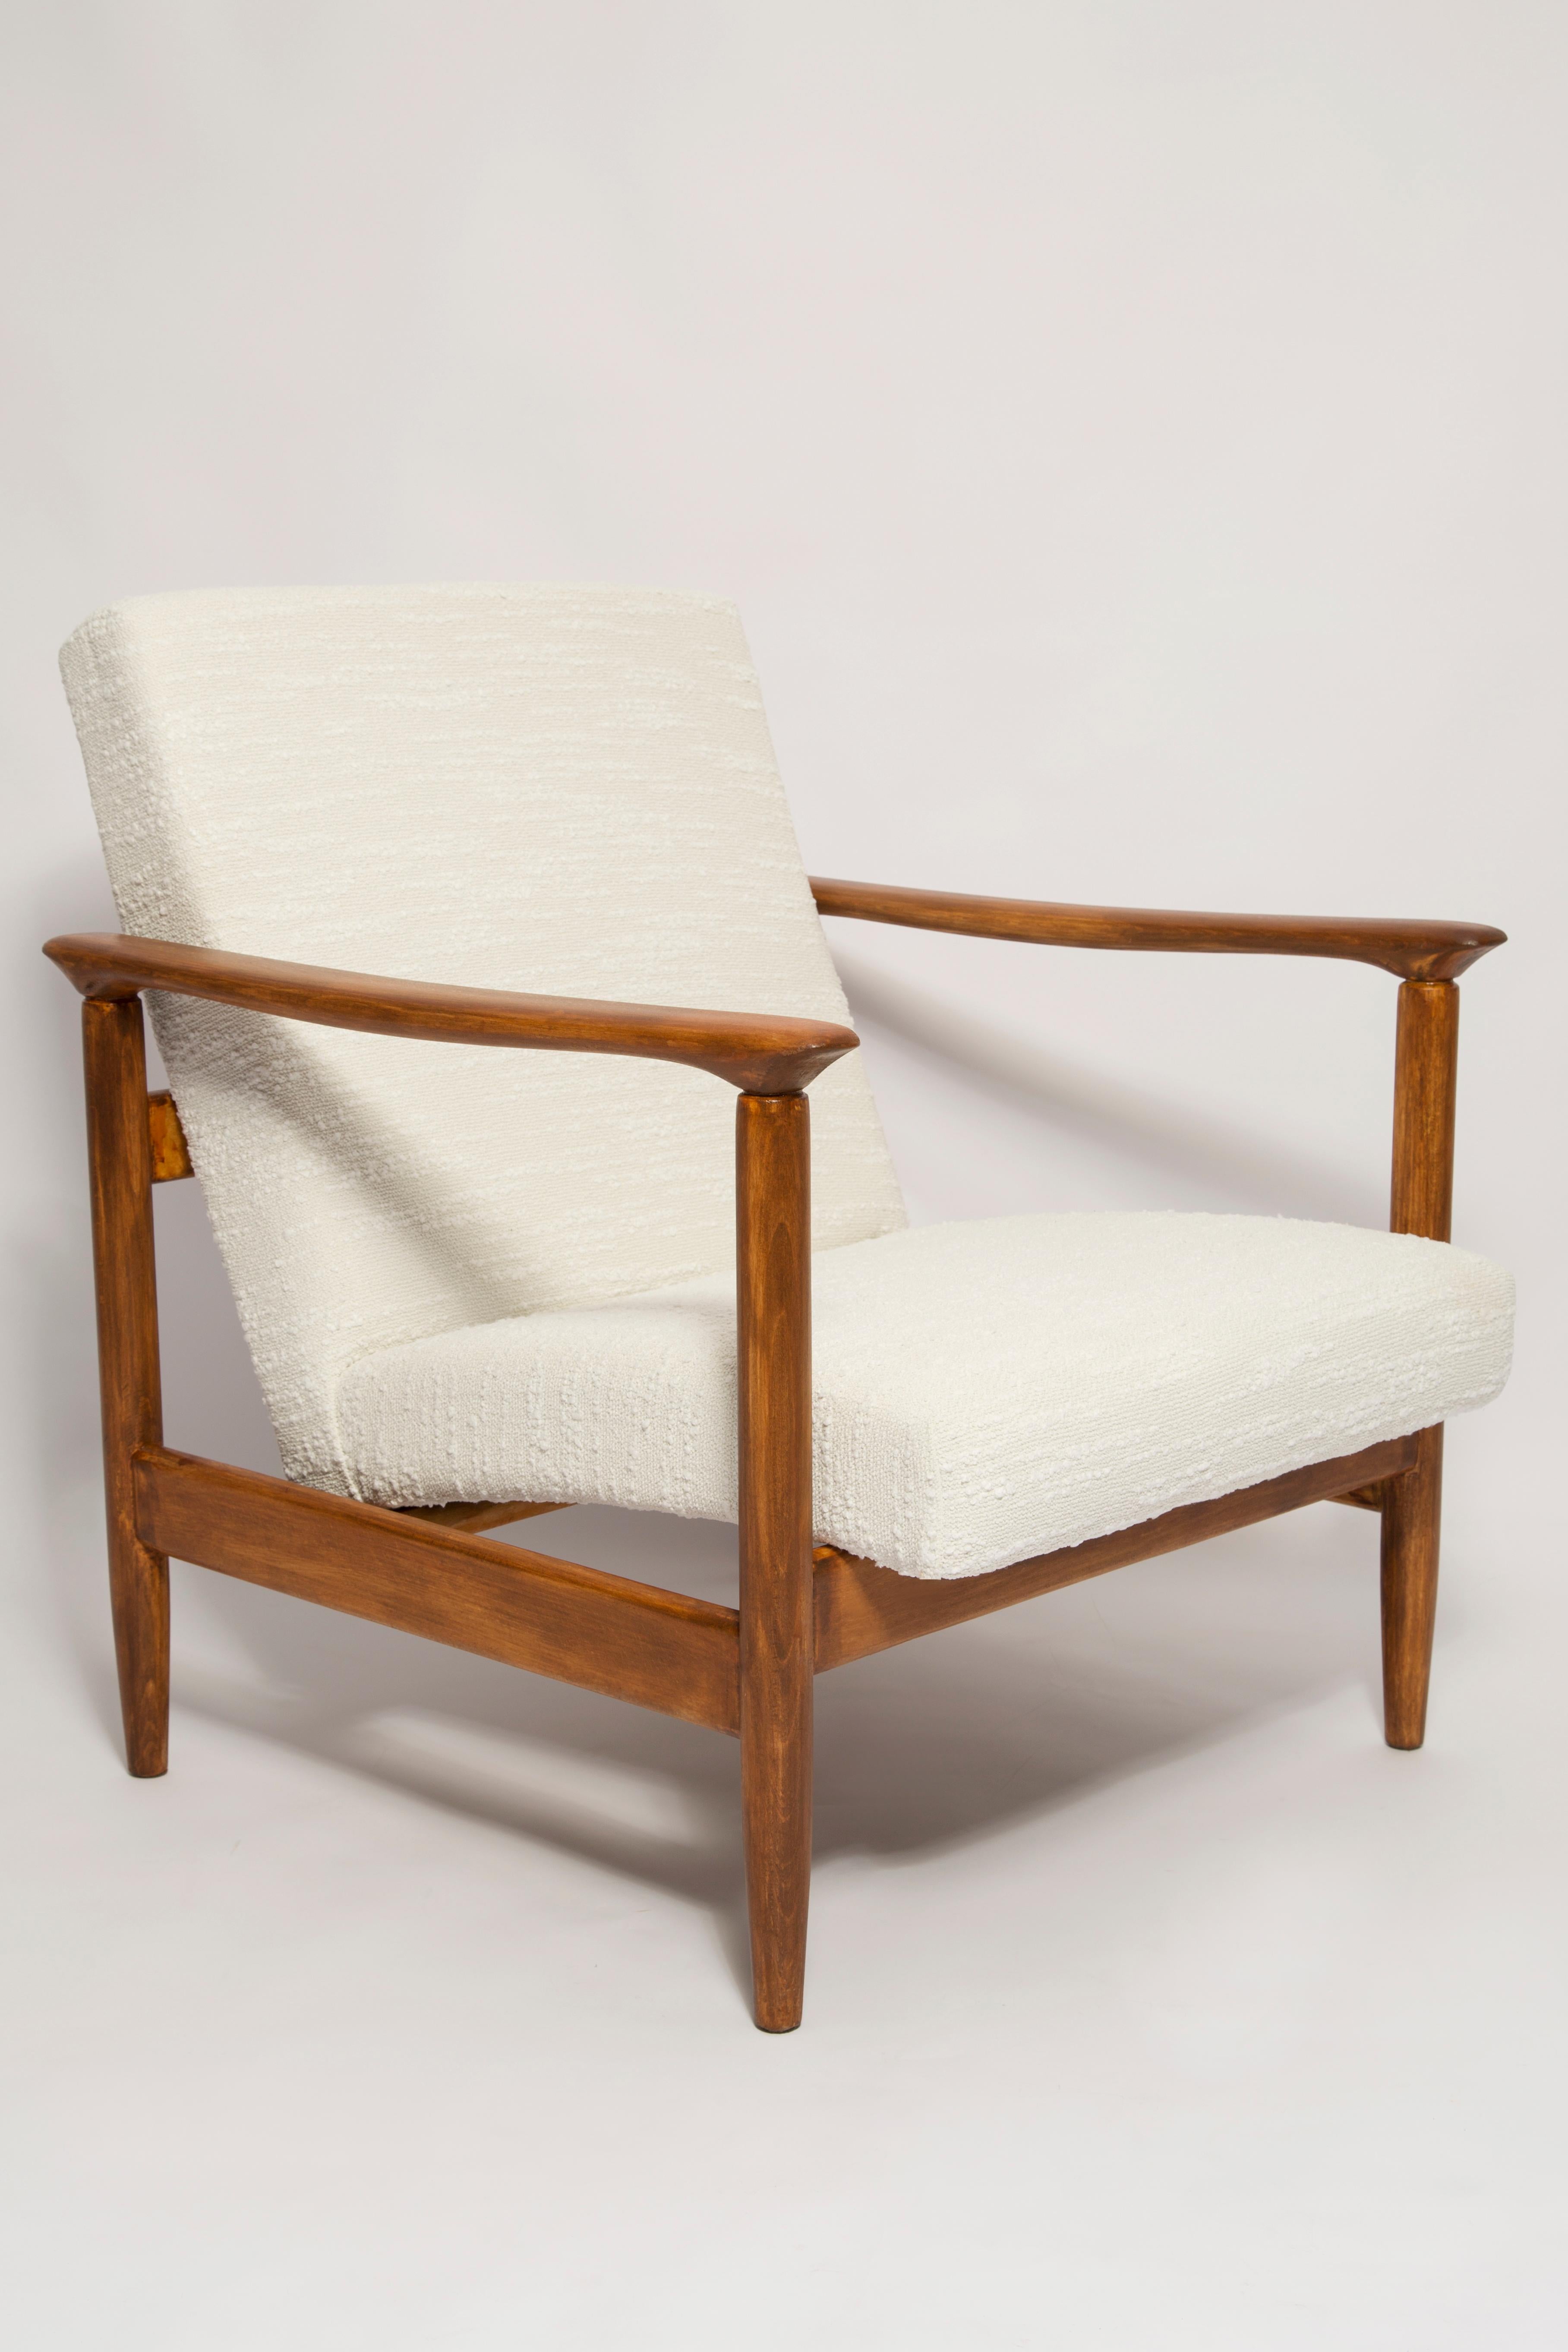 Hand-Crafted Pair of Mid Century White Boucle Armchairs, GFM 142, Edmund Homa, Europe, 1960s For Sale